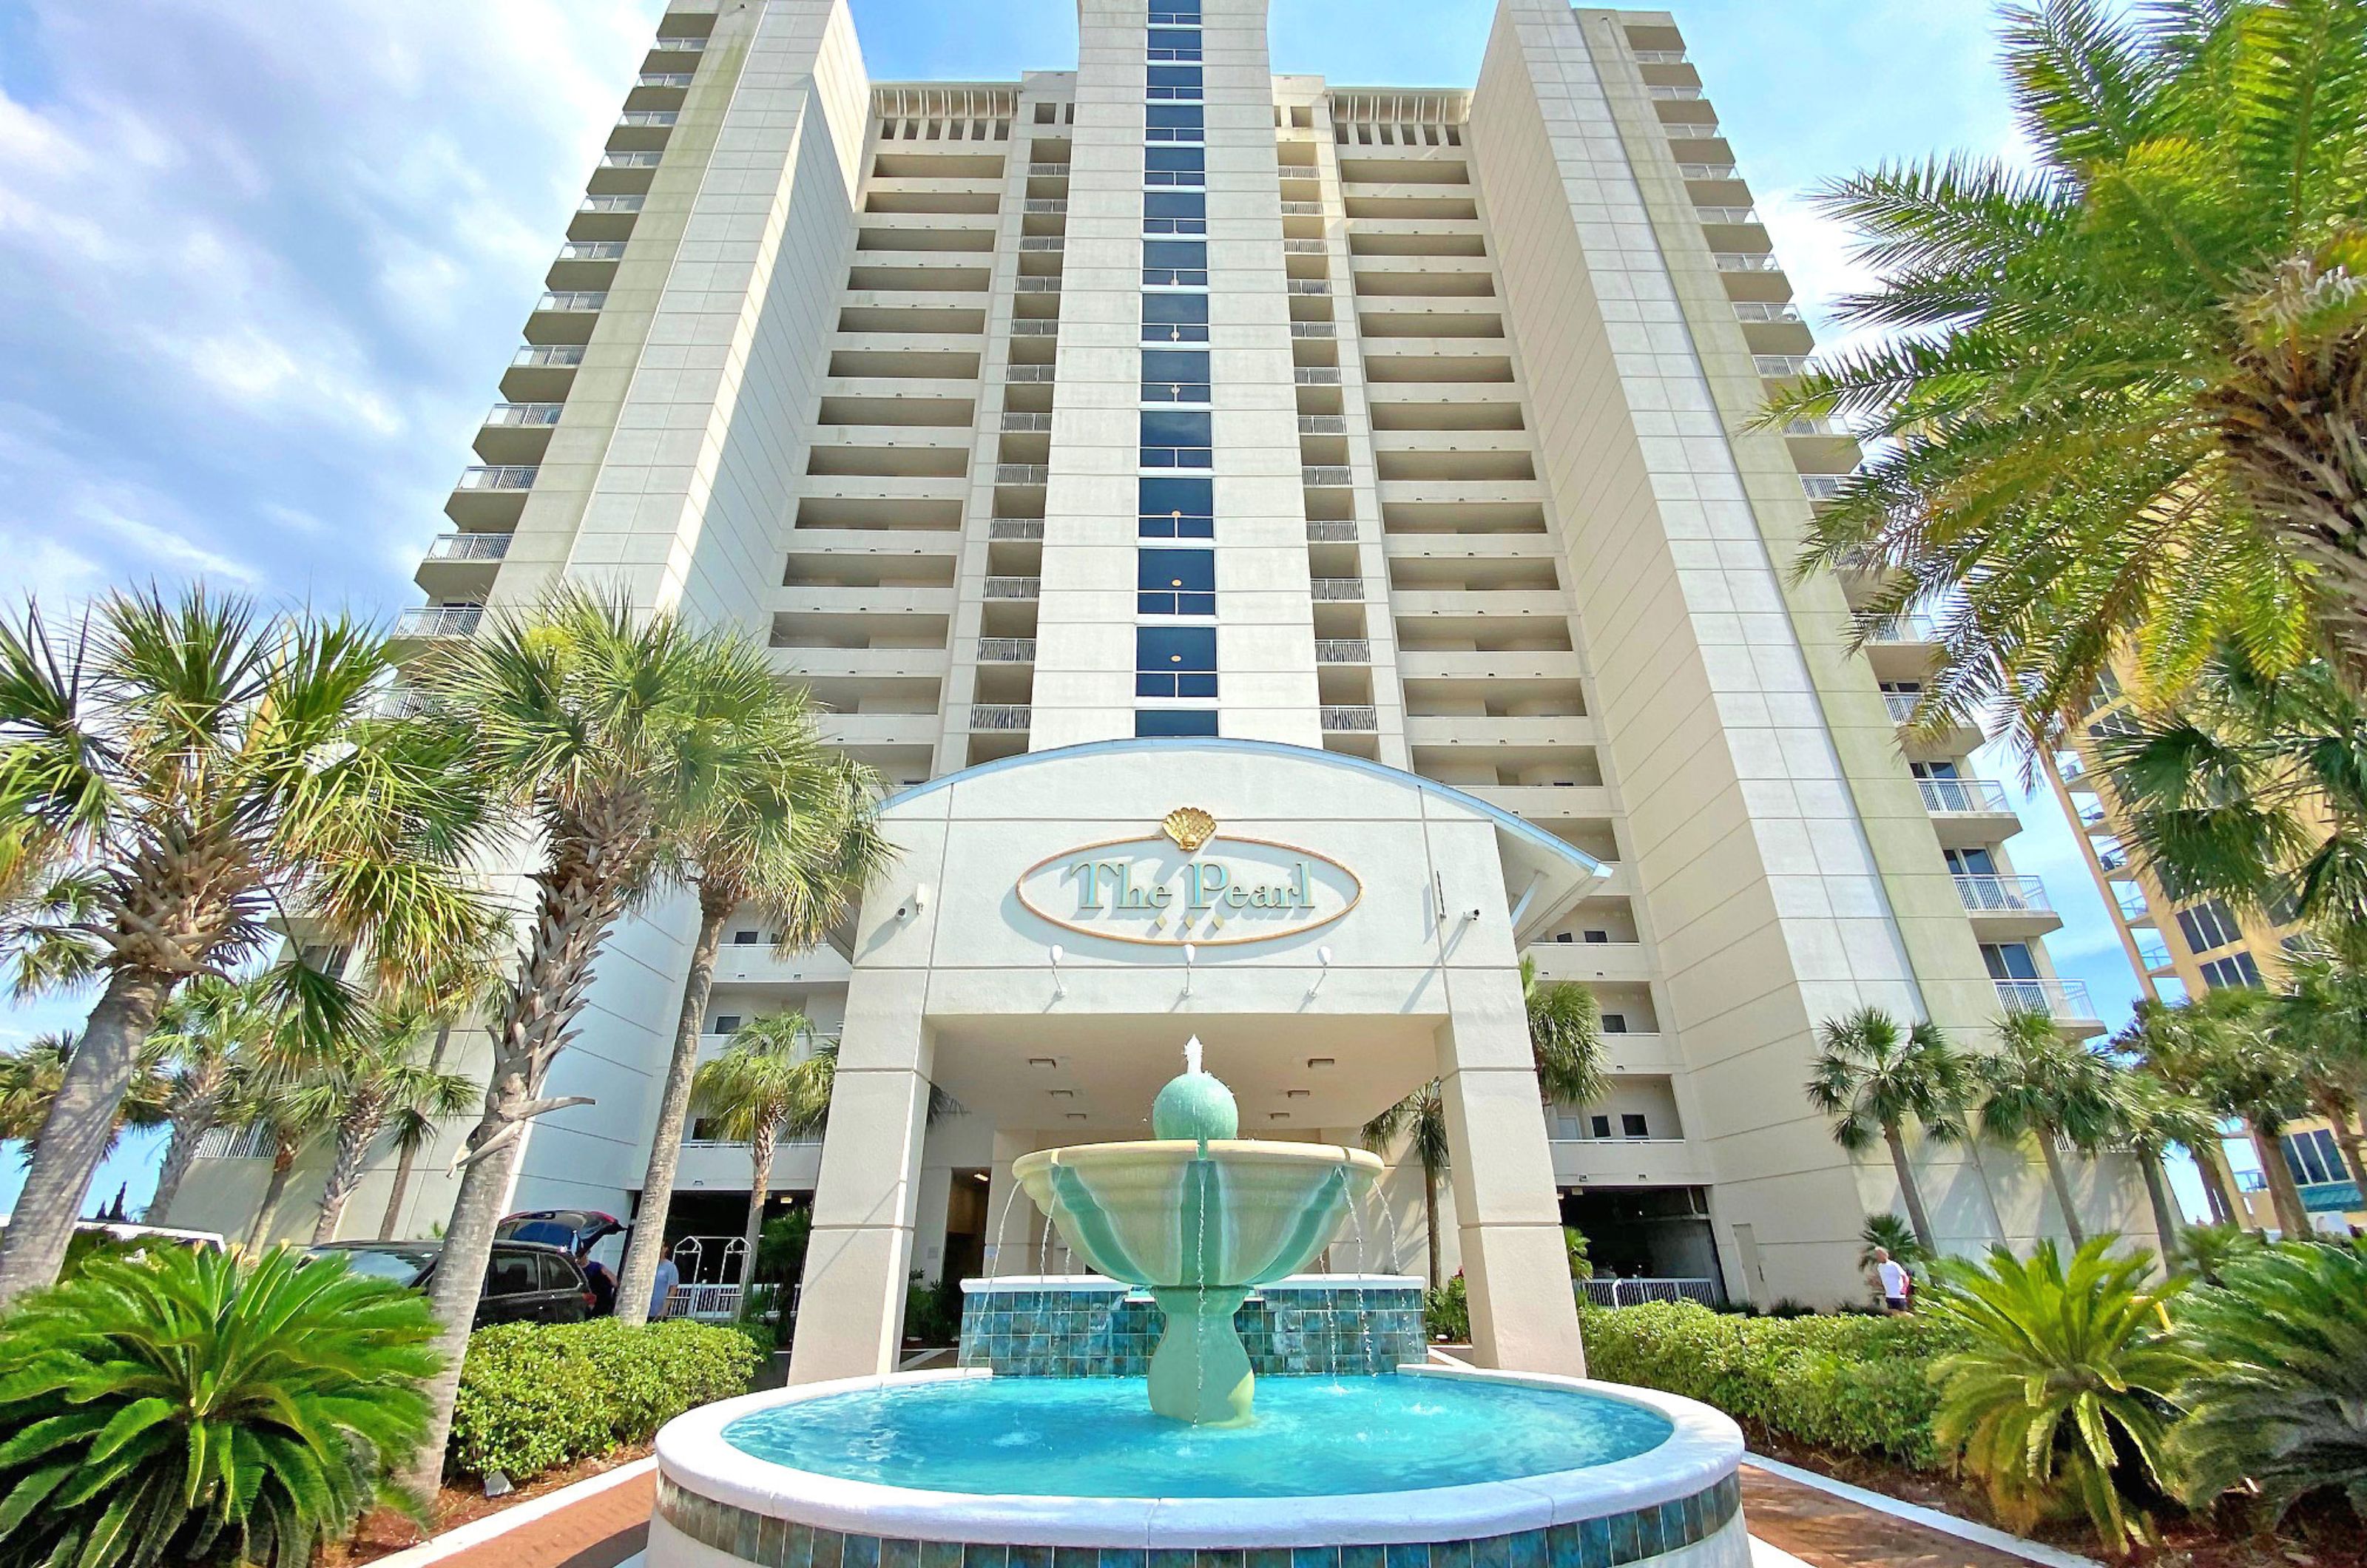 The exterior and outdoor fountain at the Pearl of Navarre	